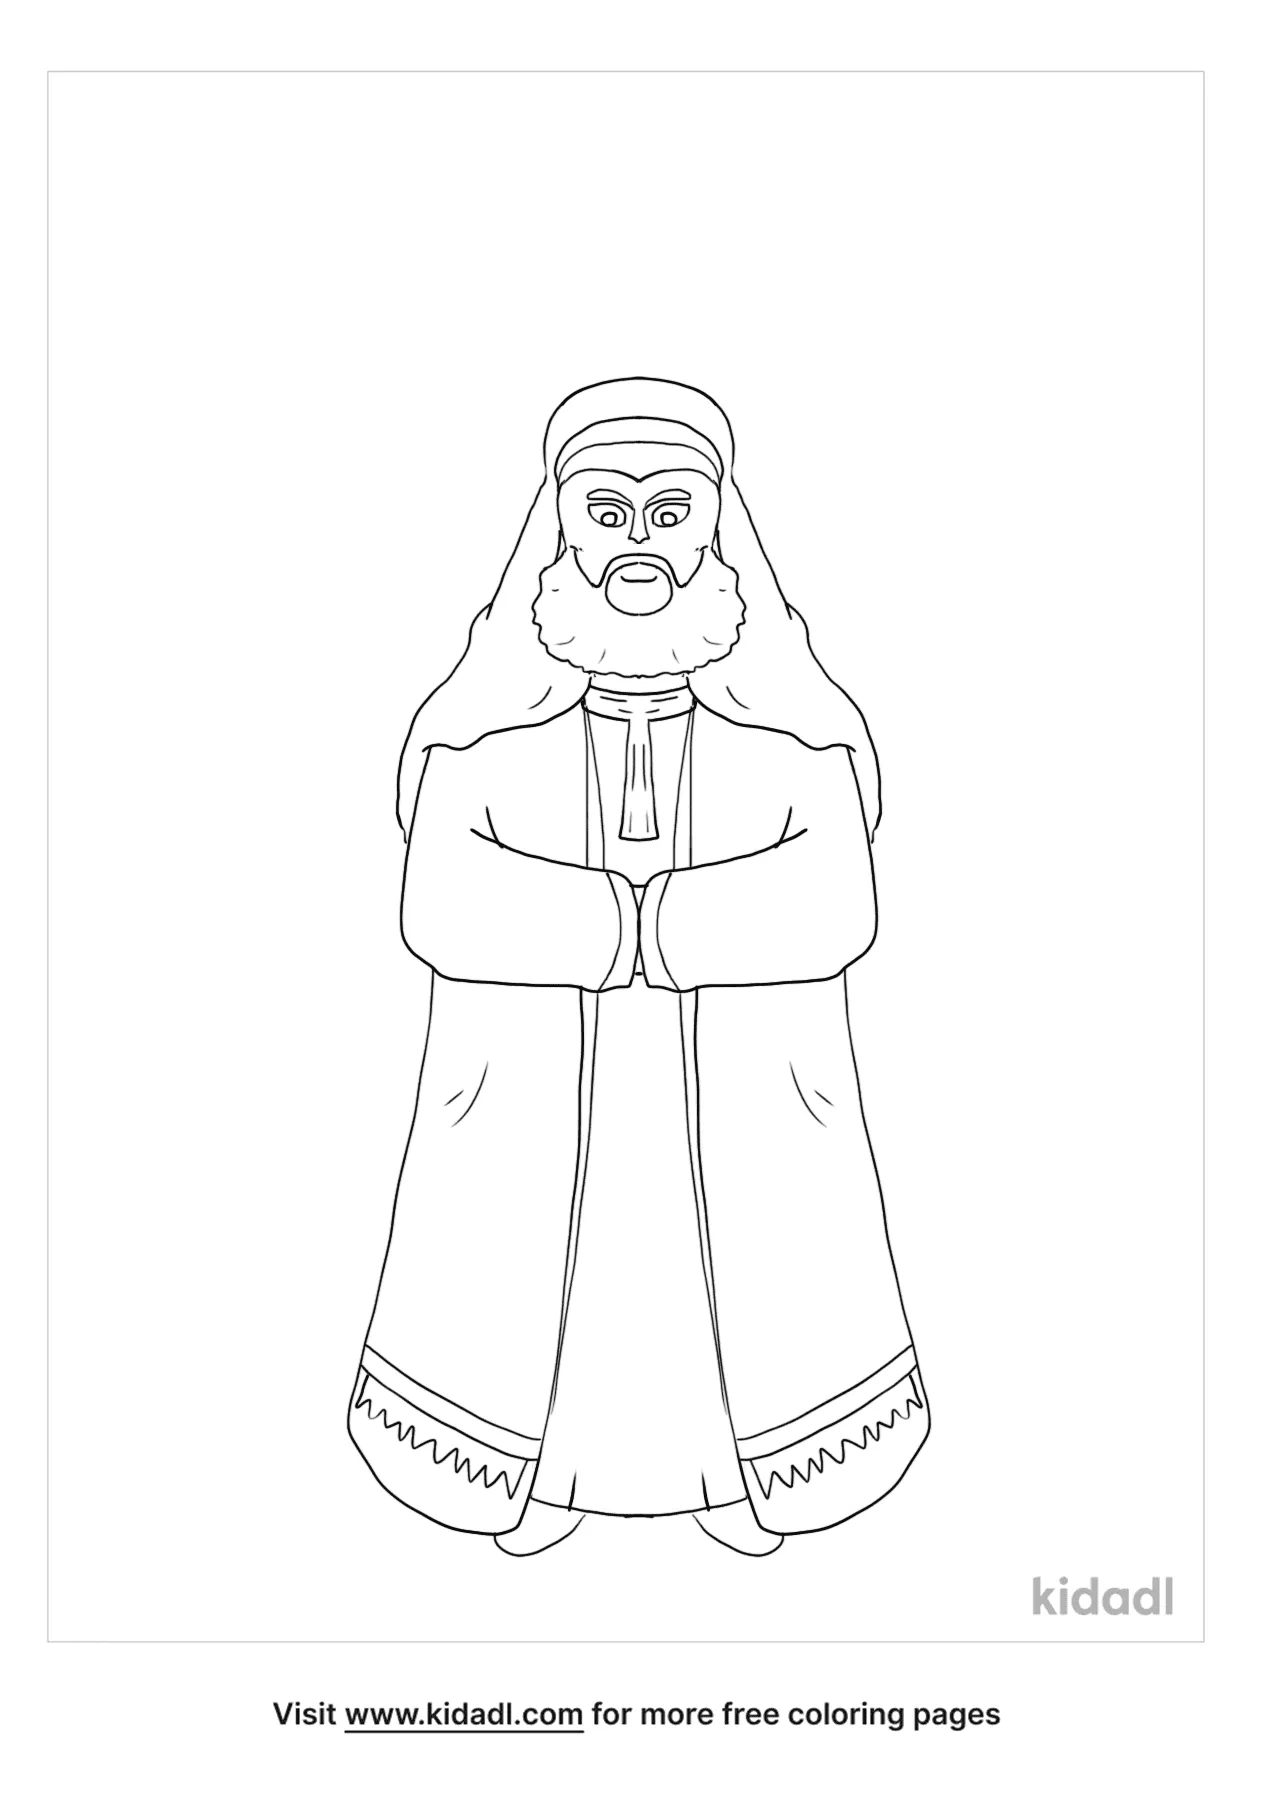 Free pharisee coloring page coloring page printables